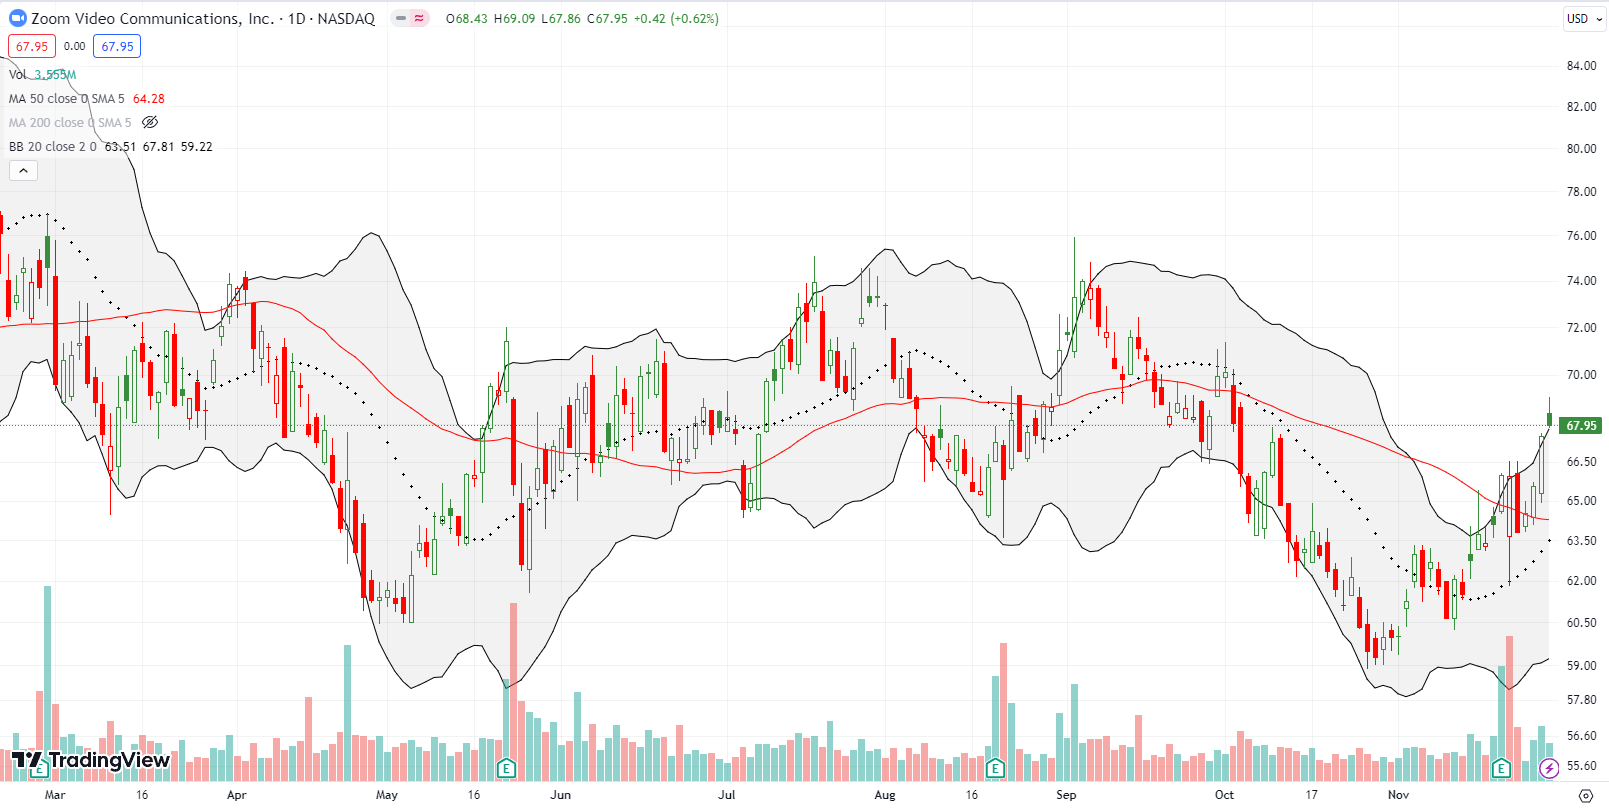 Zoom Video Communications Inc (ZM) surged upwards. ZM broke out from the upper bollinger band with a confirmed 50DMA breakout.